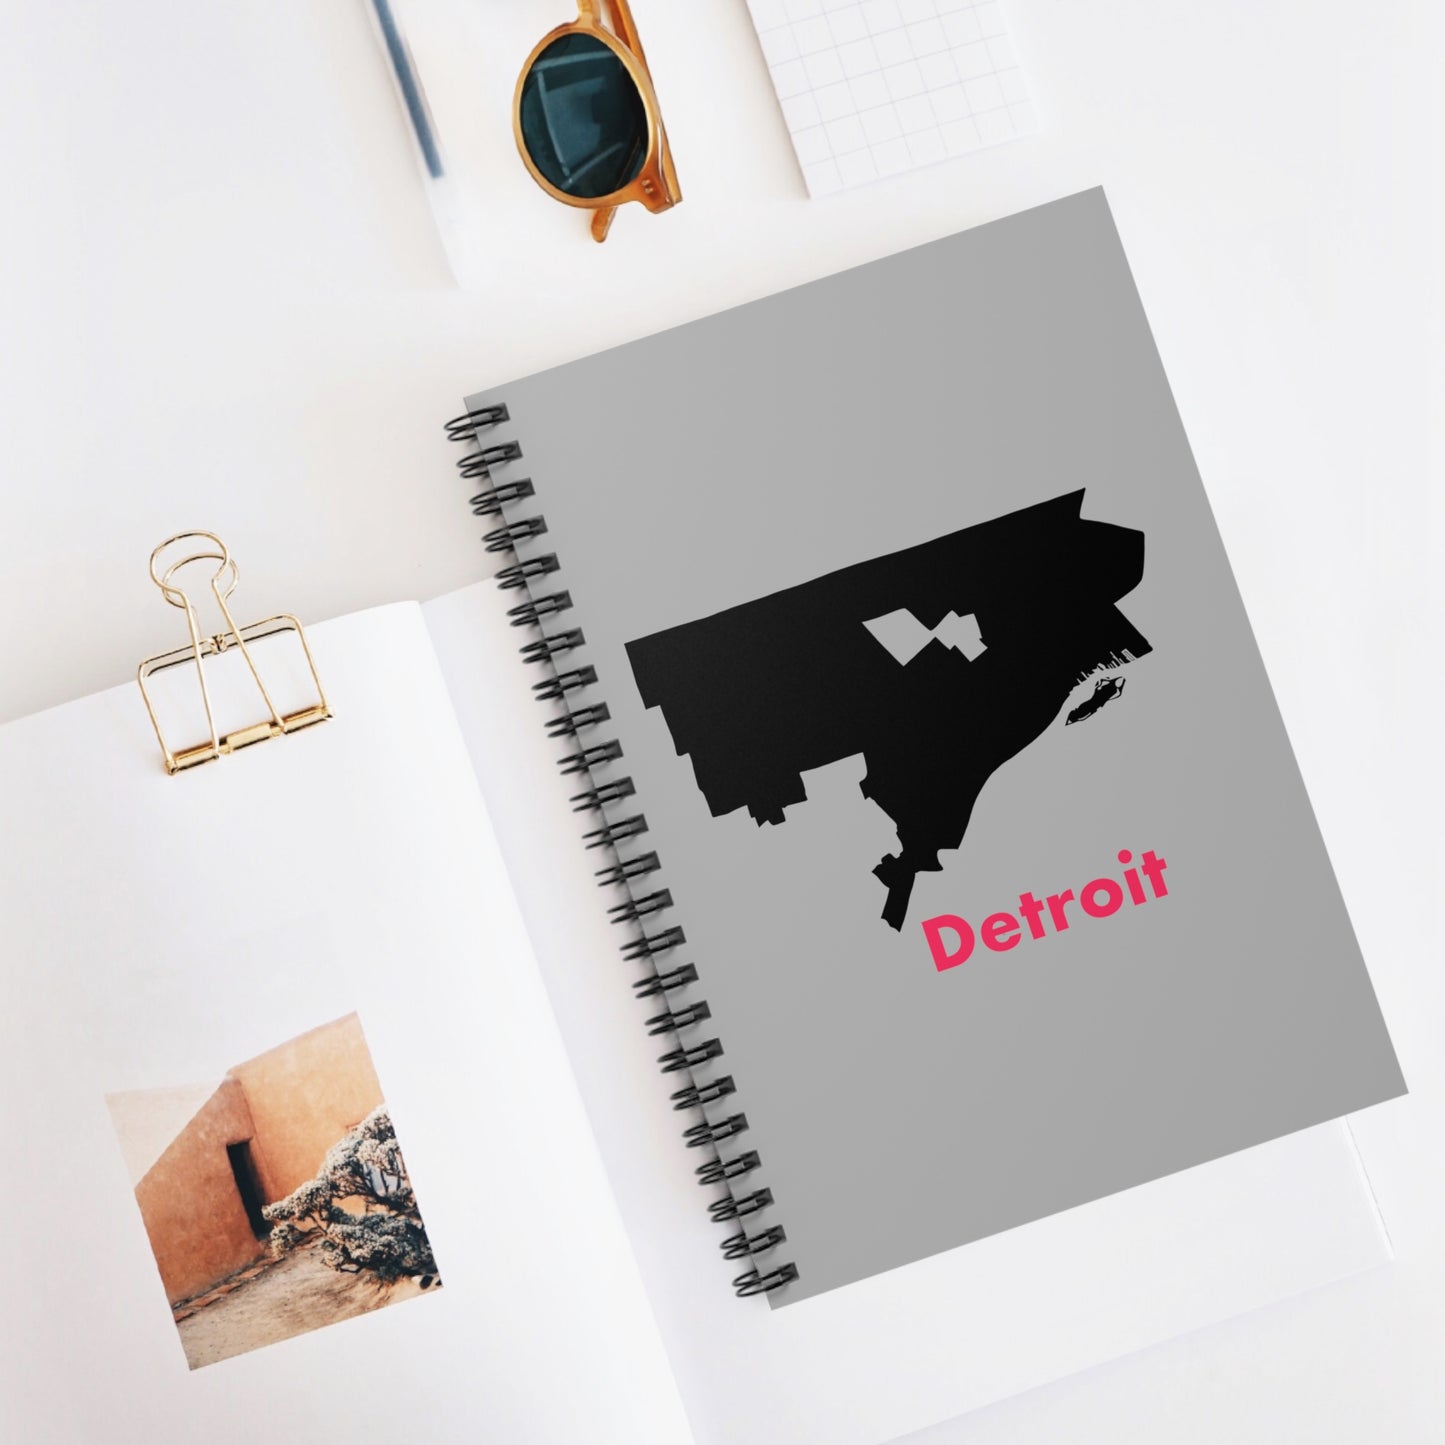 Detroit in Black and Hot Pink Spiral Notebook - Ruled Line